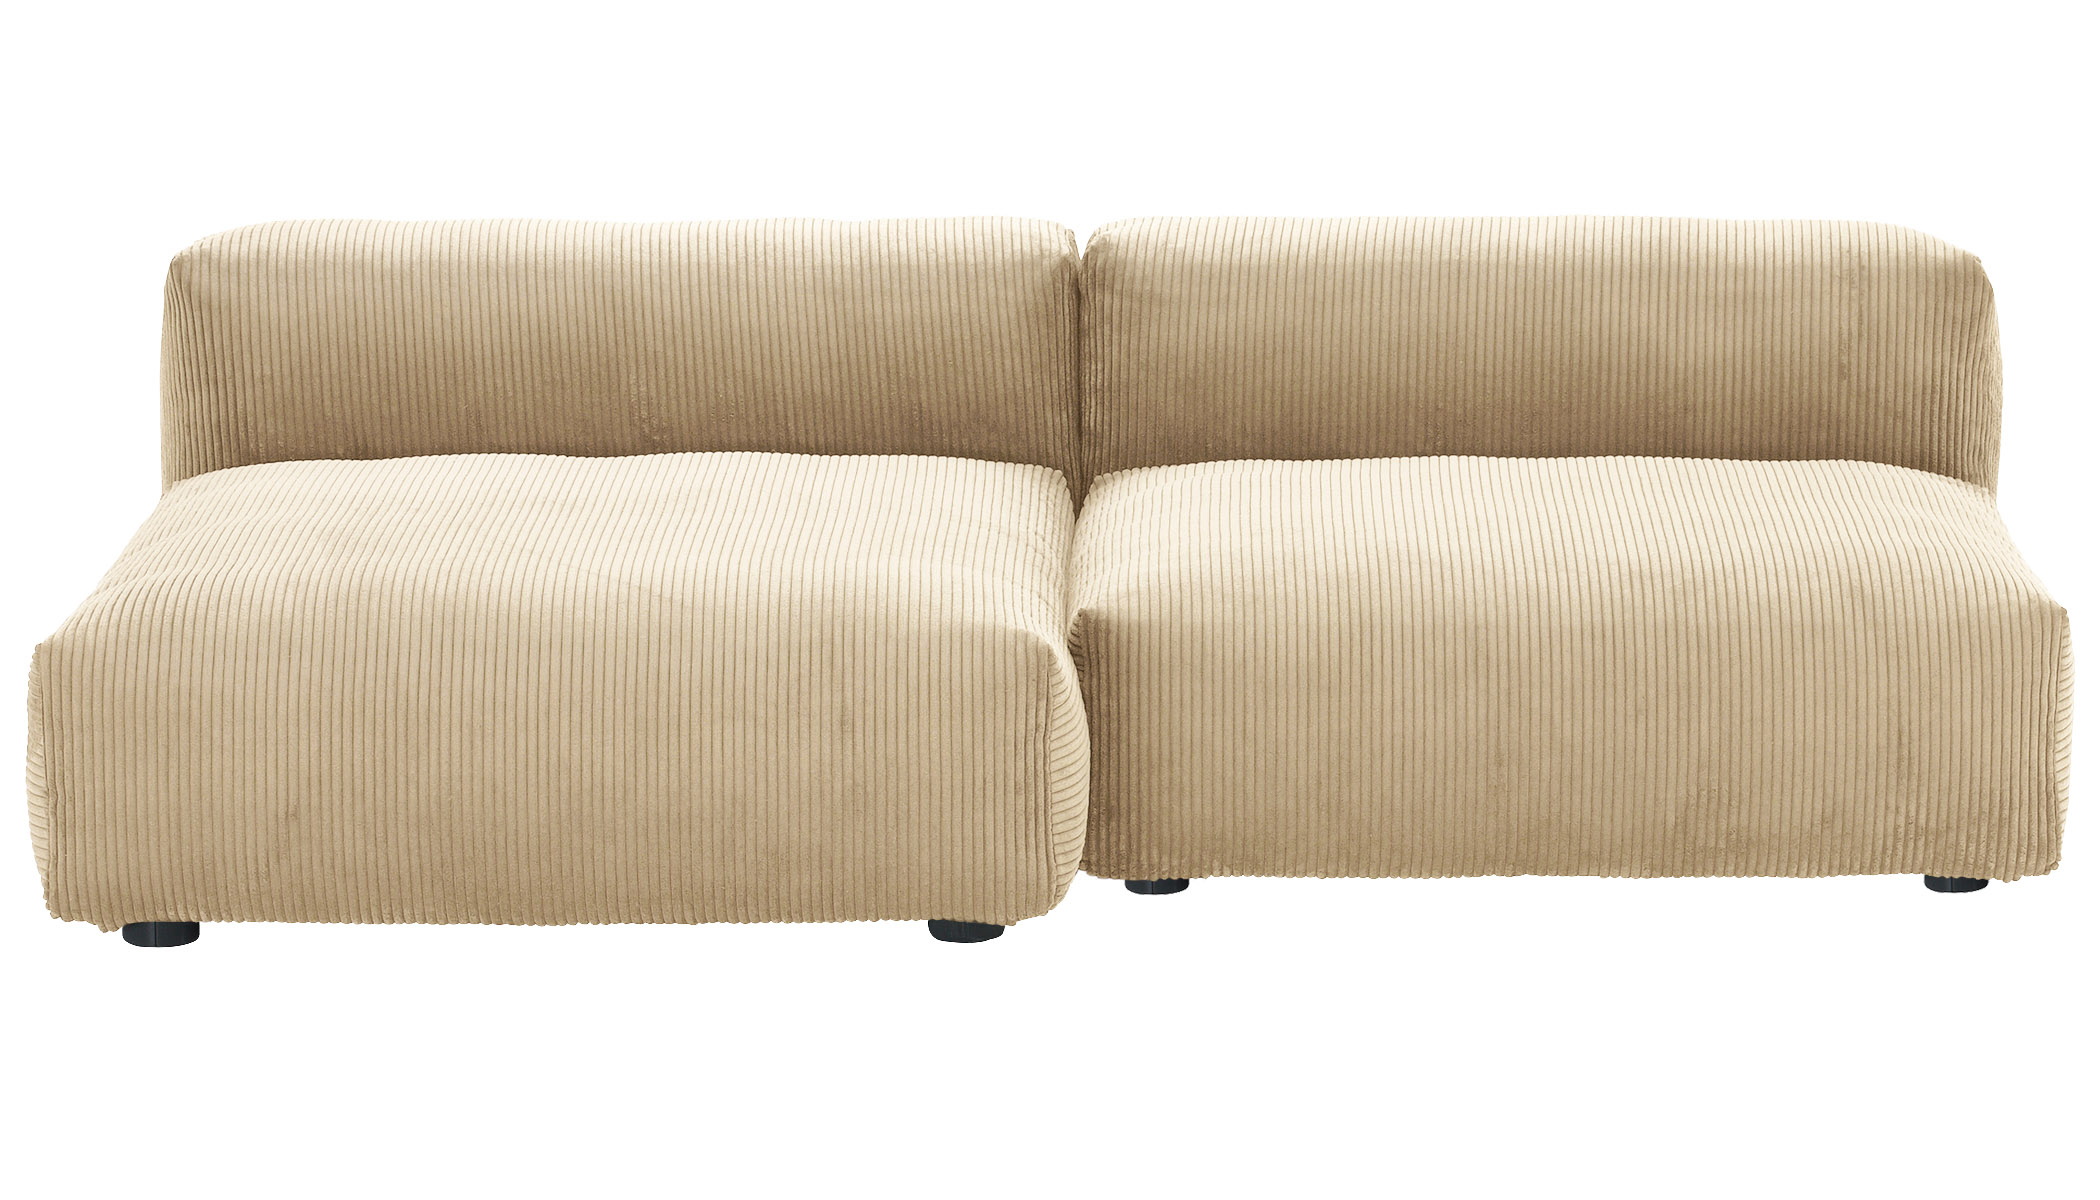  Sofa 2 Large 2 Side Cord Velours sand